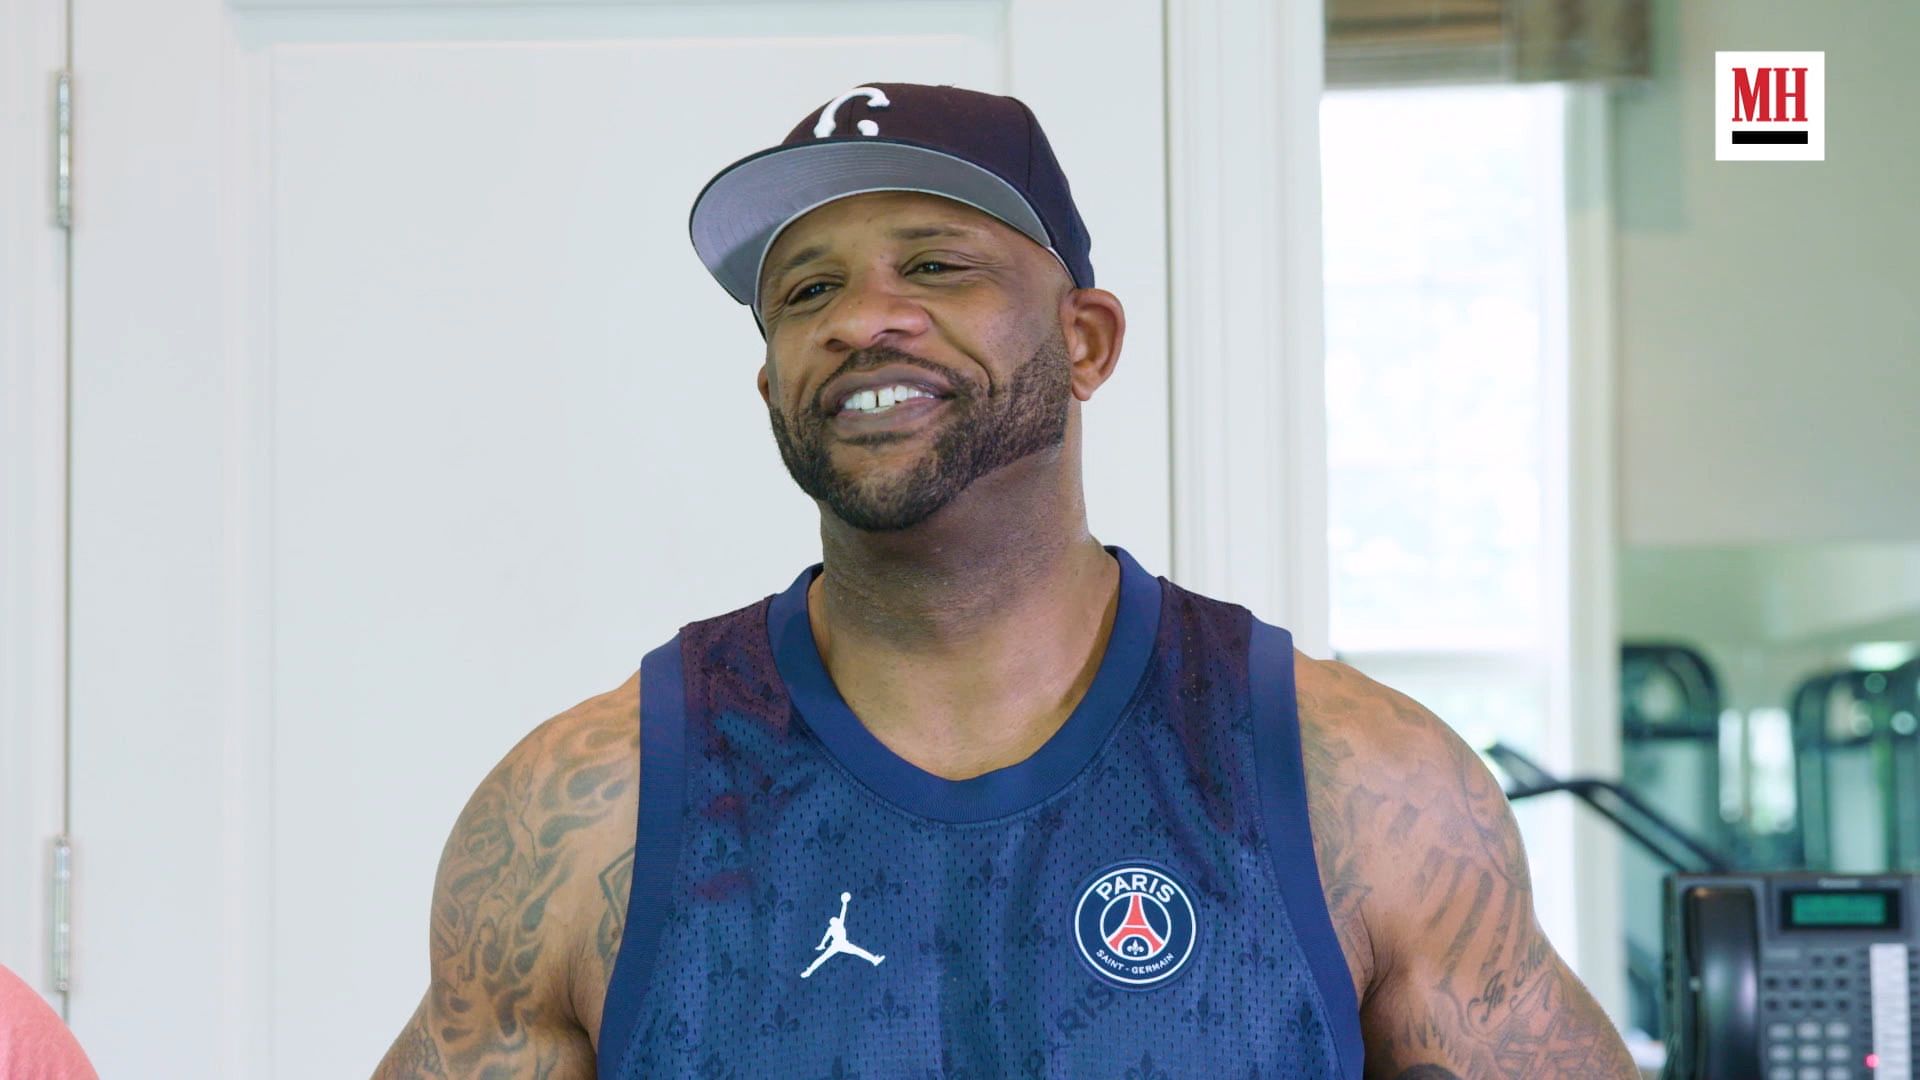 CC Sabathia Looks Shockingly Thin After Turning Fat into Muscle